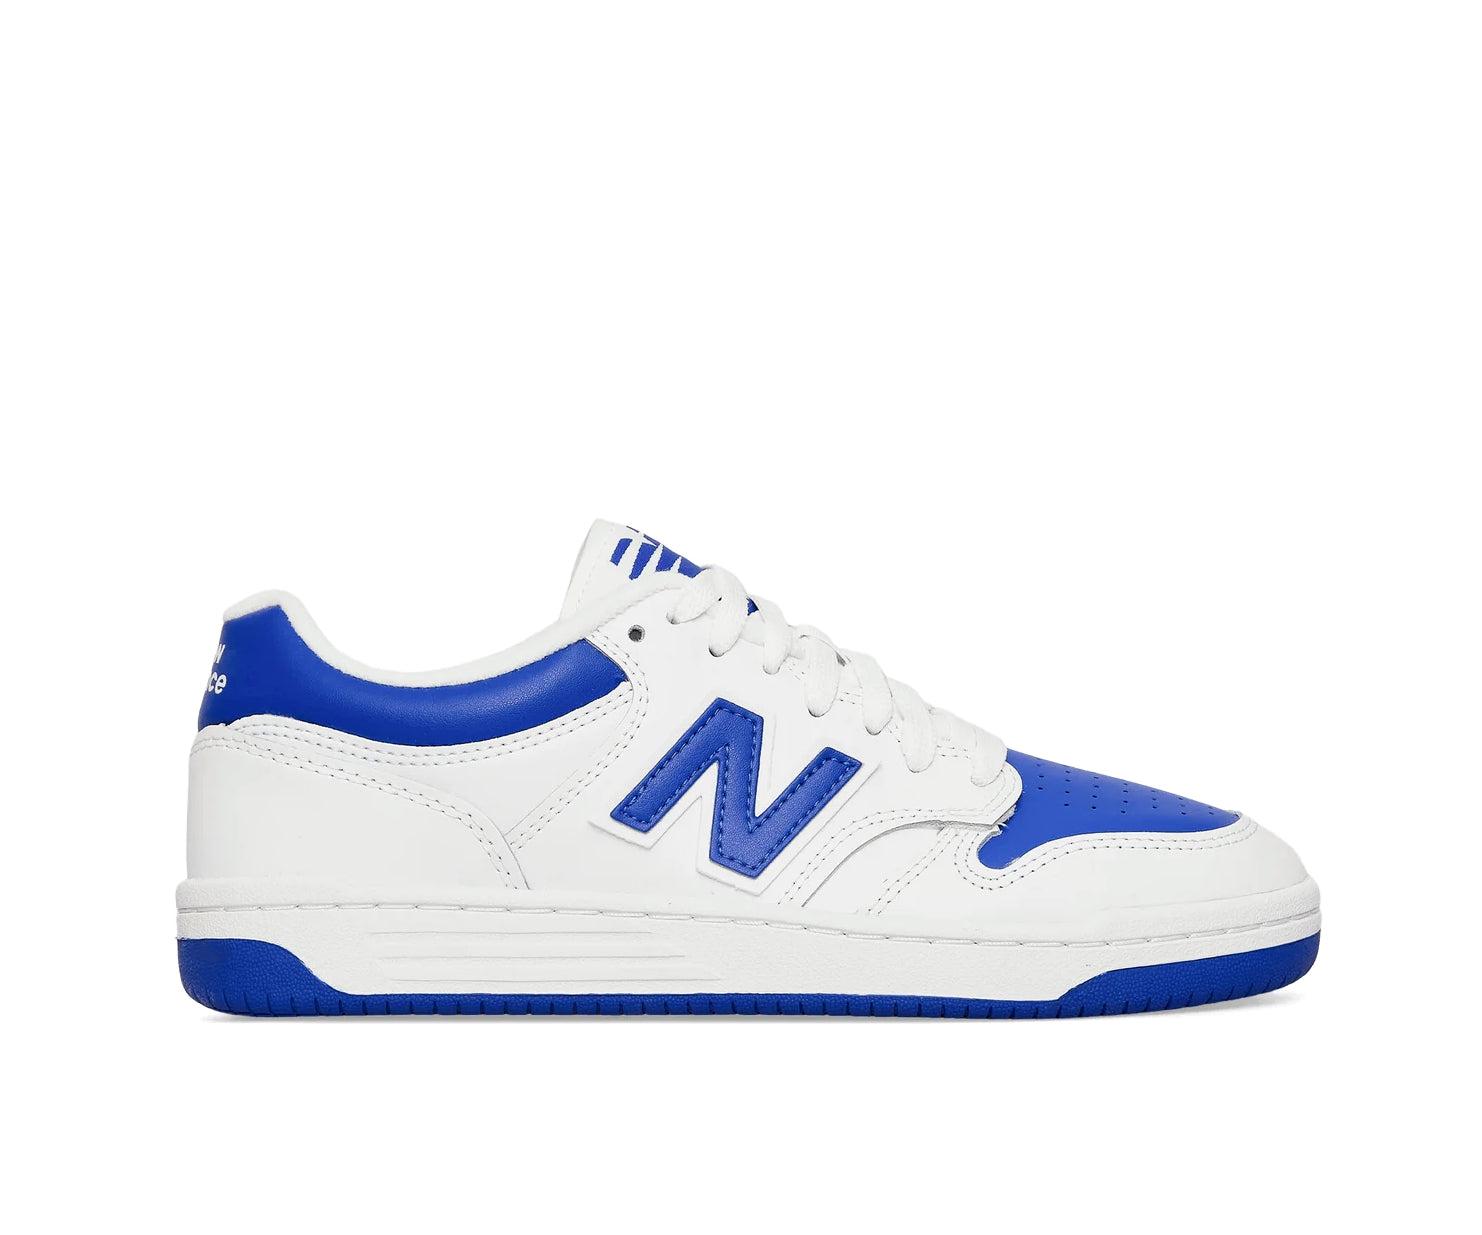 A white leather New Balance basketball shoe with cobalt blue accents.